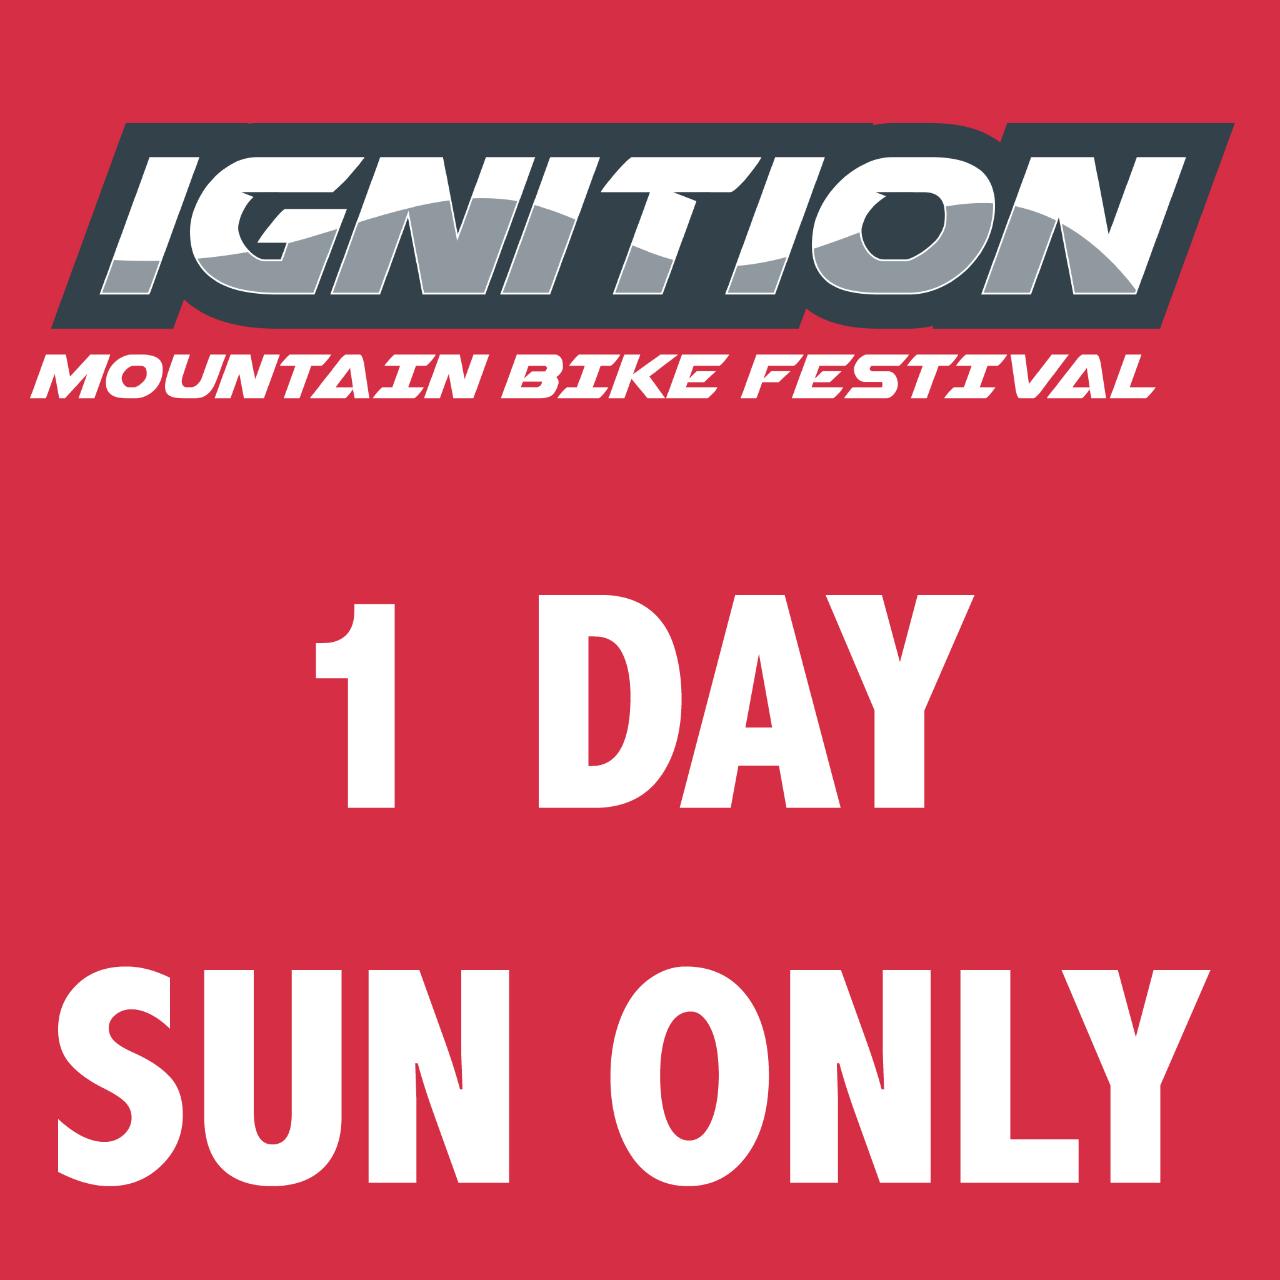 Ignition MTB Festival - 1 DAY SUNDAY ONLY